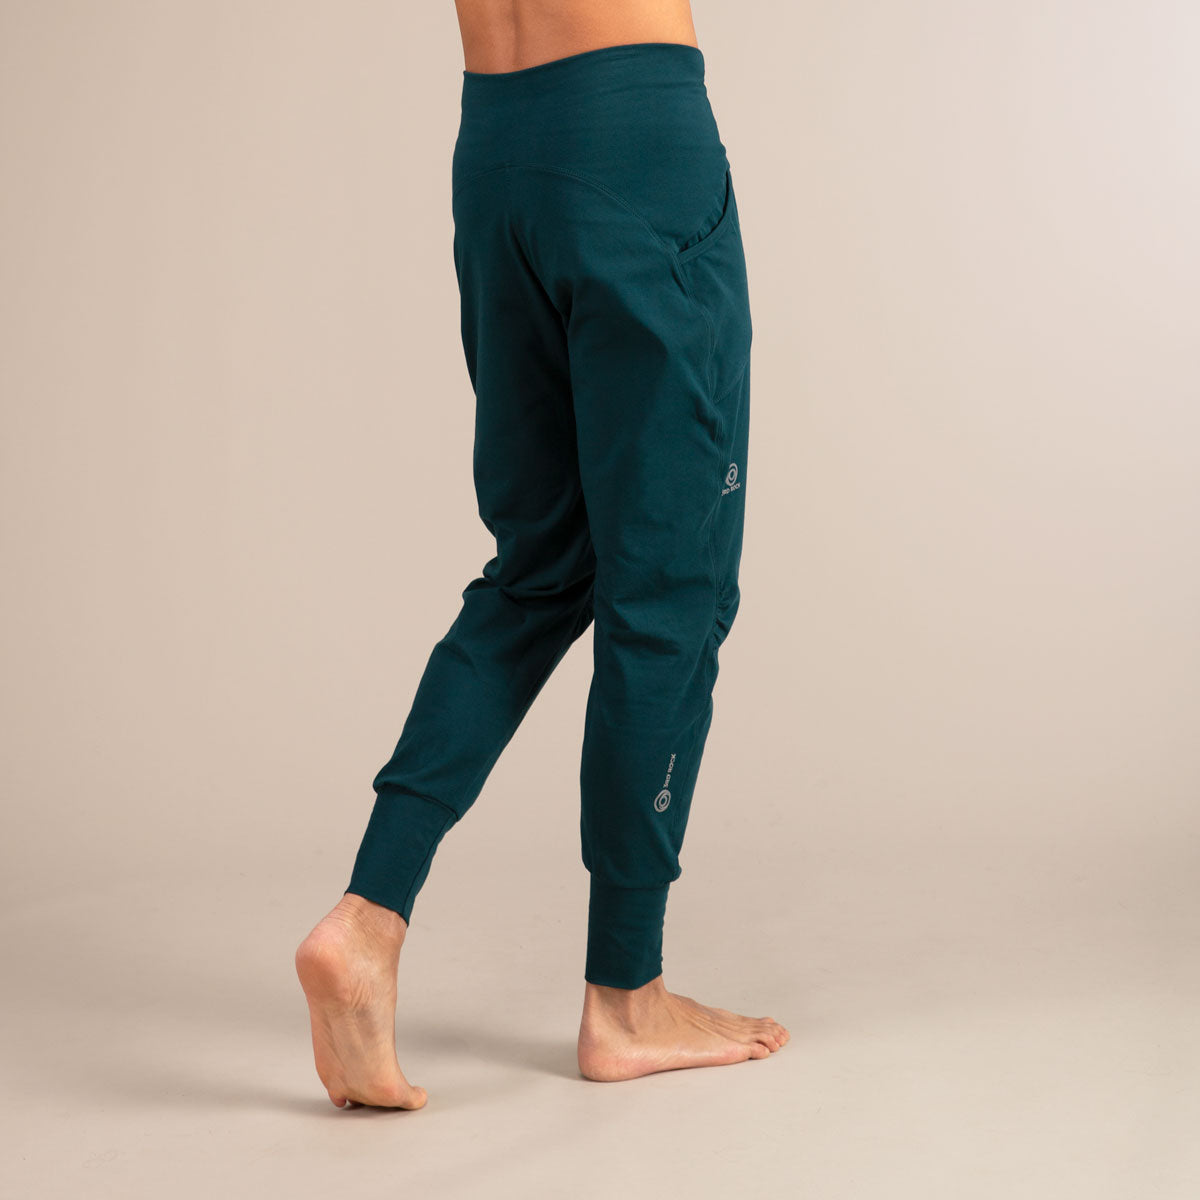 BATABOOM Sweatpants | Super Soft Organic Sweats | 3RD ROCK Clothing -  Donald is 6ft 1 with a 29" waist, 36" hips and wears a 30/LL.  M